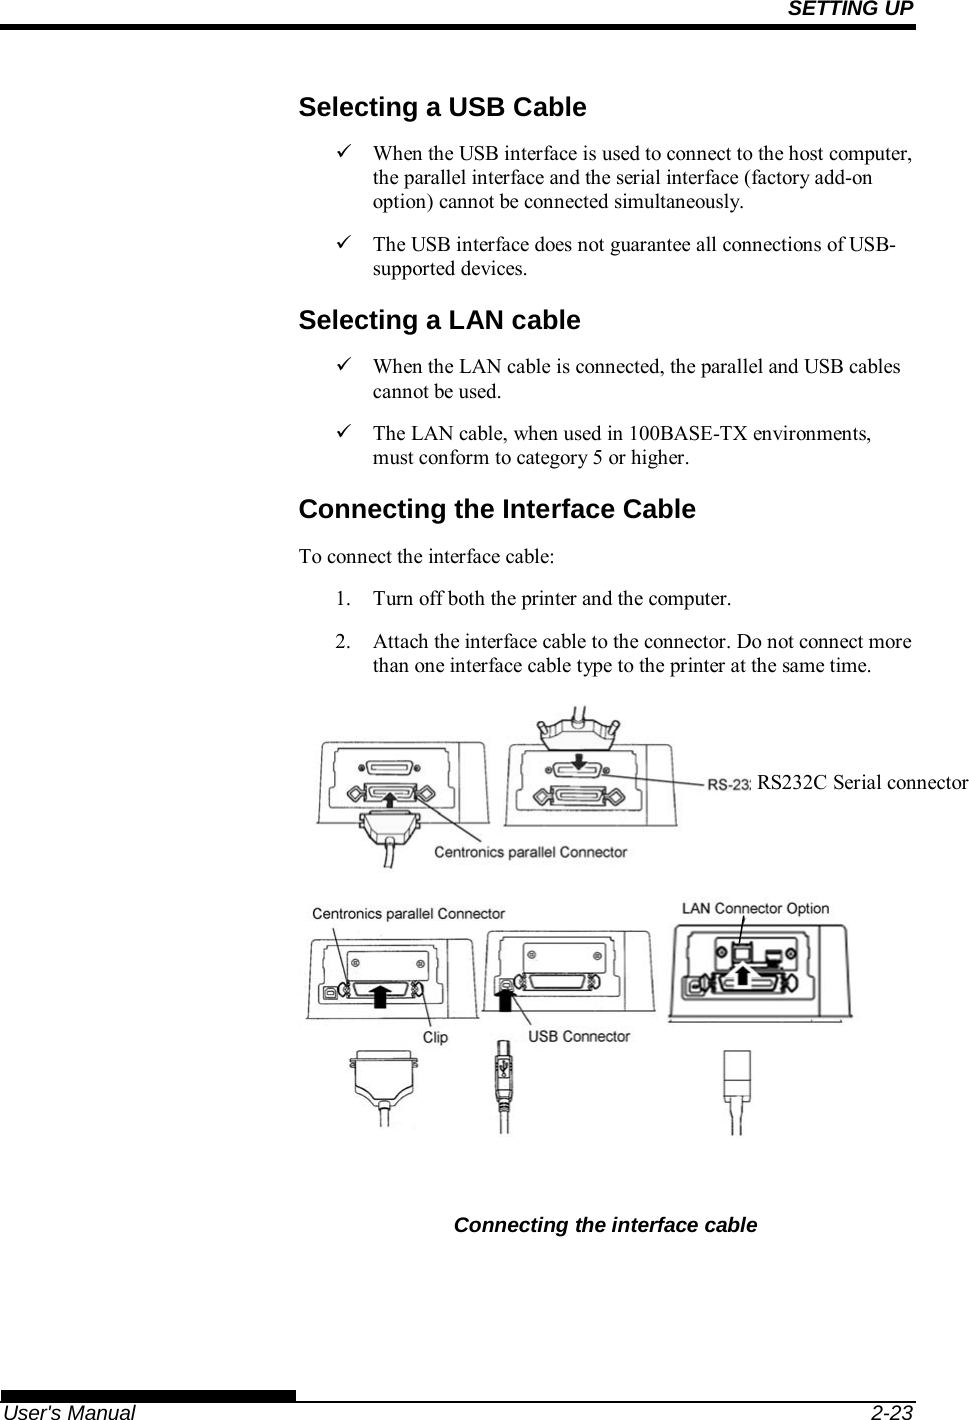 SETTING UP   User&apos;s Manual  2-23 Selecting a USB Cable   When the USB interface is used to connect to the host computer, the parallel interface and the serial interface (factory add-on option) cannot be connected simultaneously.   The USB interface does not guarantee all connections of USB-supported devices. Selecting a LAN cable   When the LAN cable is connected, the parallel and USB cables cannot be used.   The LAN cable, when used in 100BASE-TX environments, must conform to category 5 or higher. Connecting the Interface Cable To connect the interface cable: 1.  Turn off both the printer and the computer. 2.  Attach the interface cable to the connector. Do not connect more than one interface cable type to the printer at the same time.    Connecting the interface cable RS232C Serial connector 